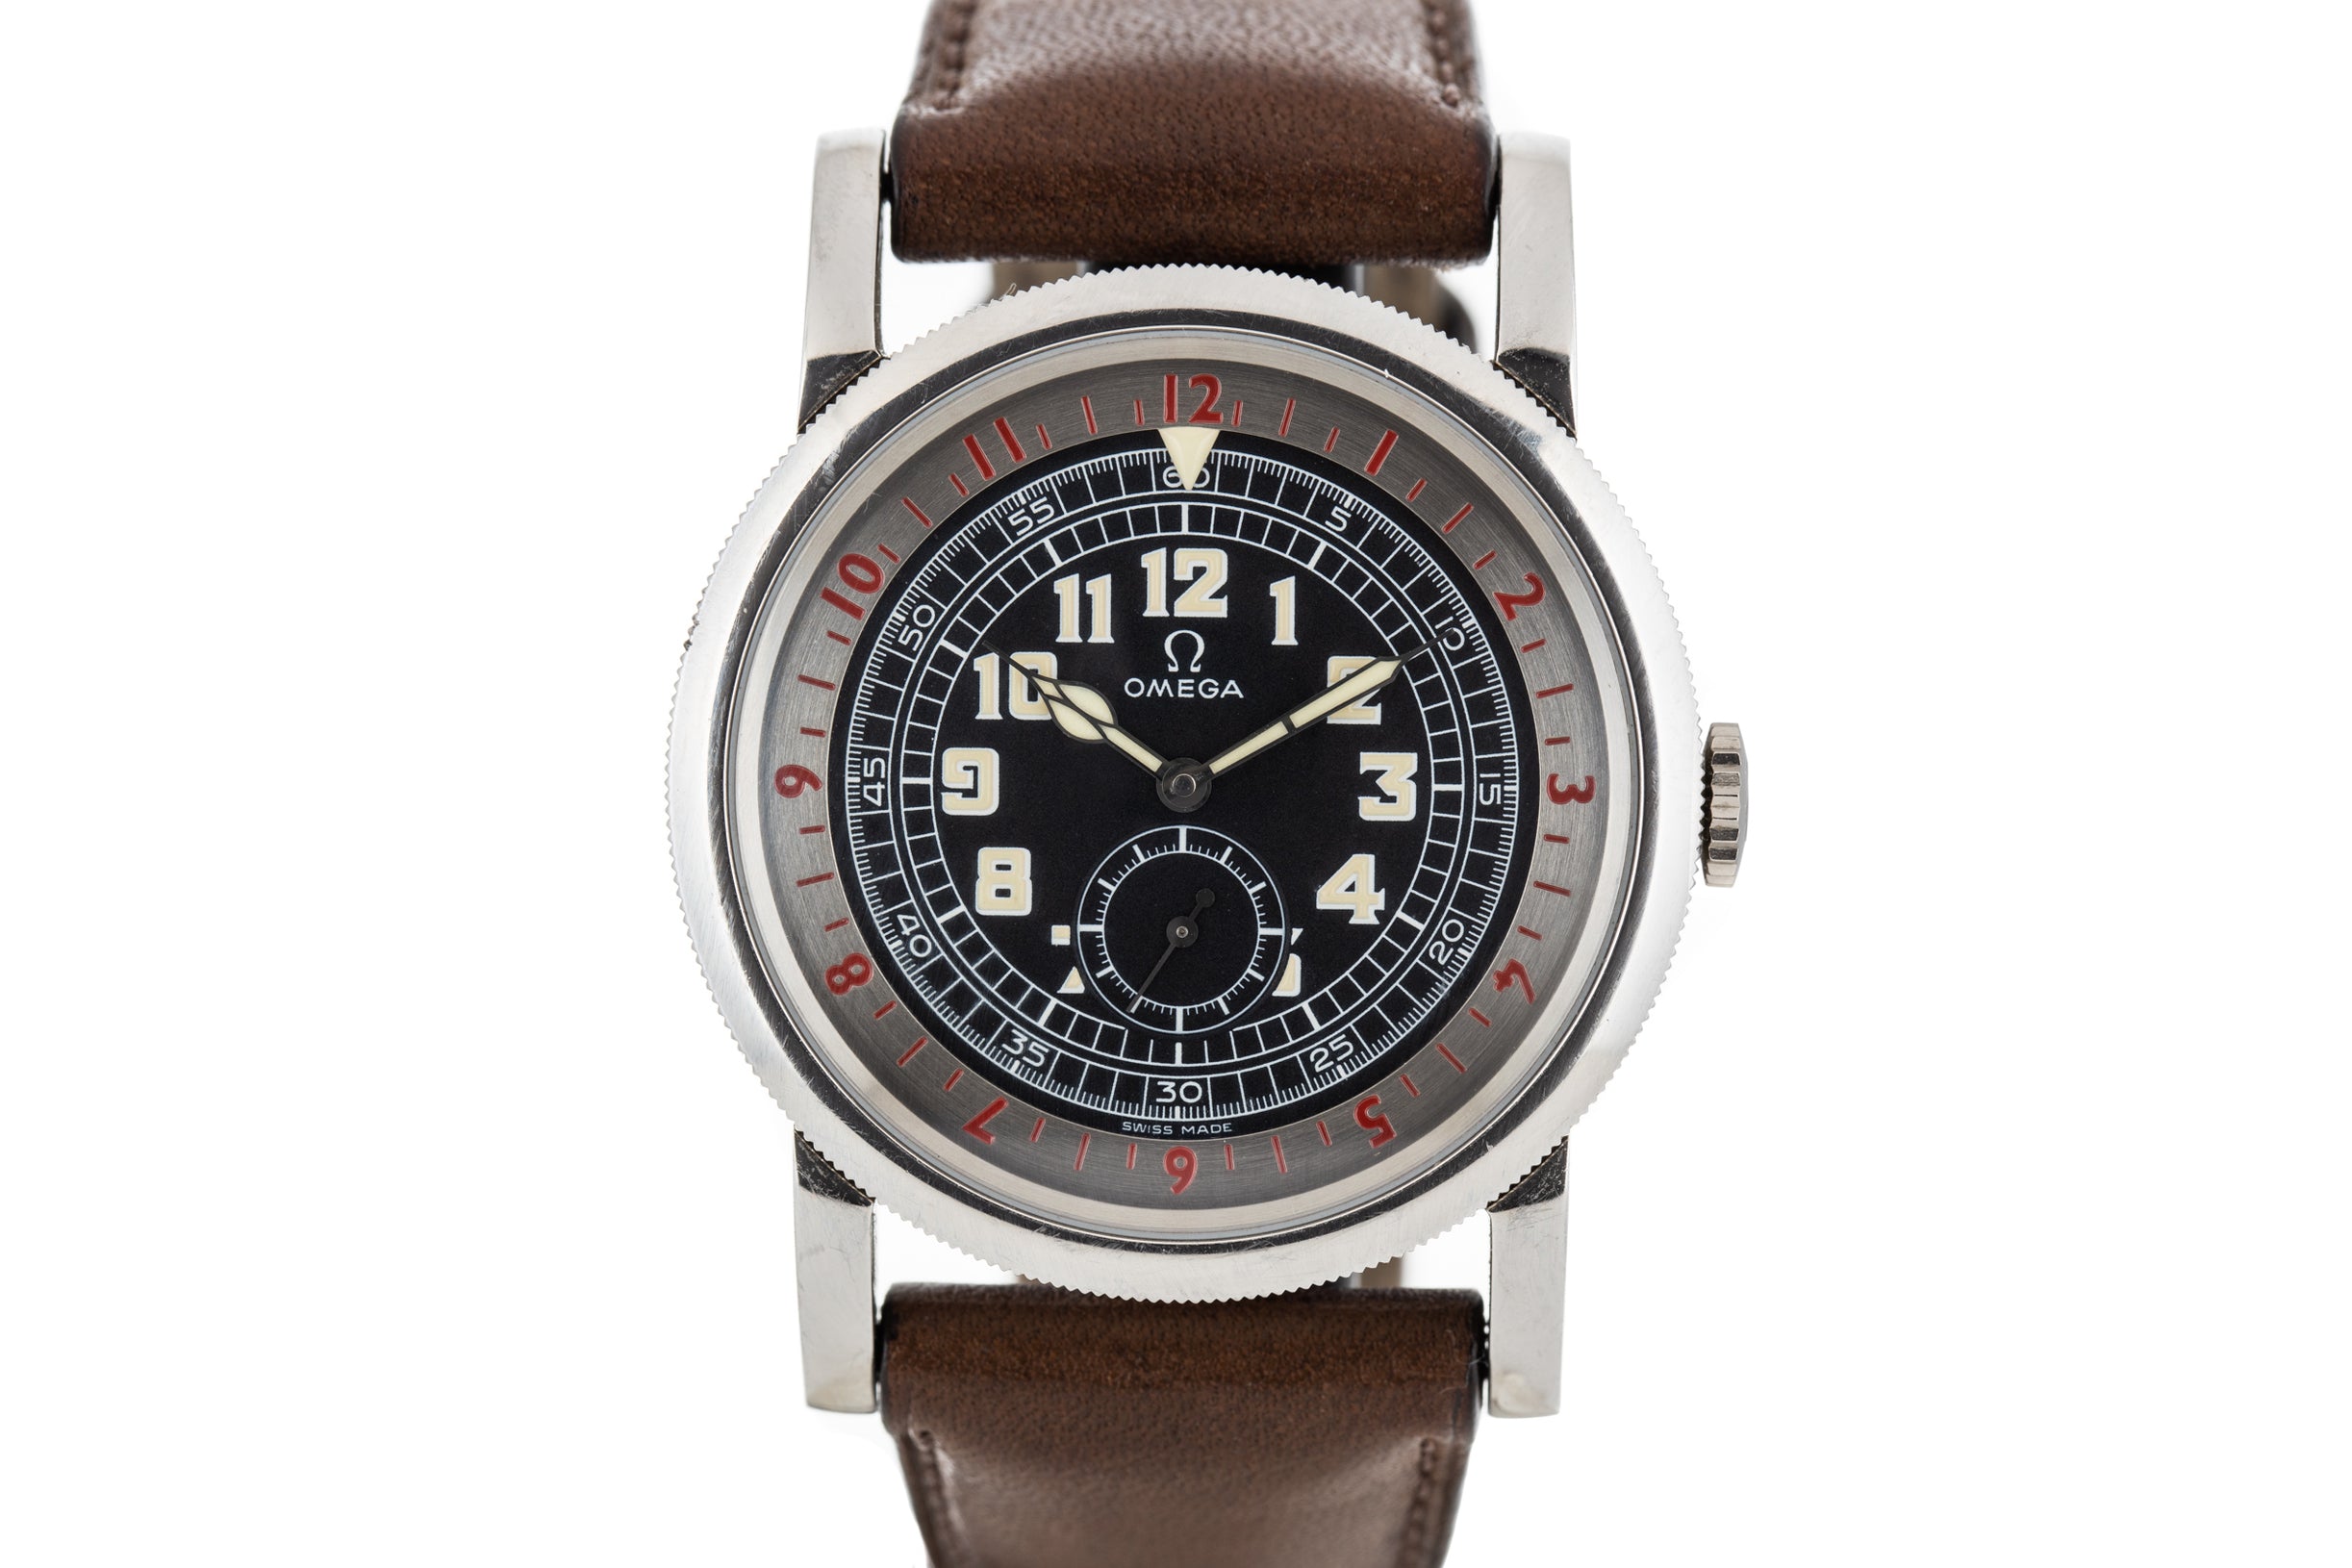 Omega Museum Collection 1938 Pilots Watch – Analog:Shift